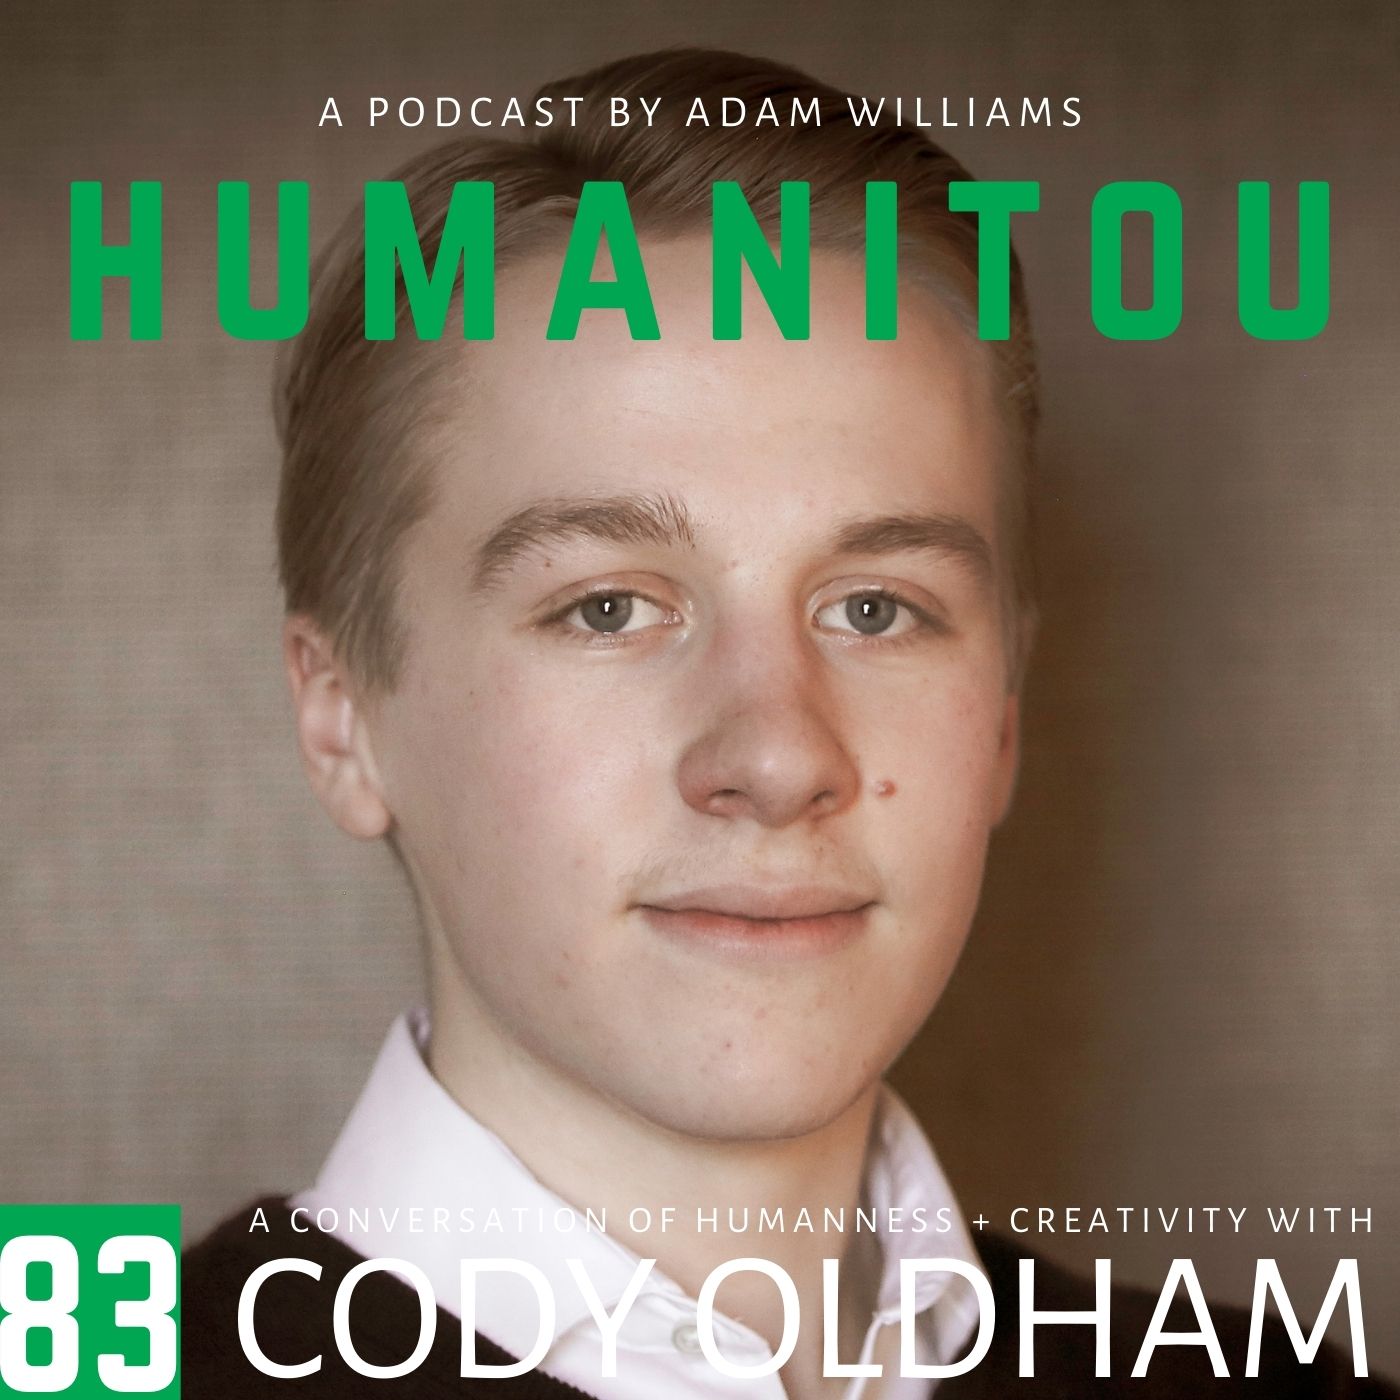 83: Cody Oldham, professional artist, on his precocious start in art, living with mountain lions, and his preference for wingtips and ties even while painting